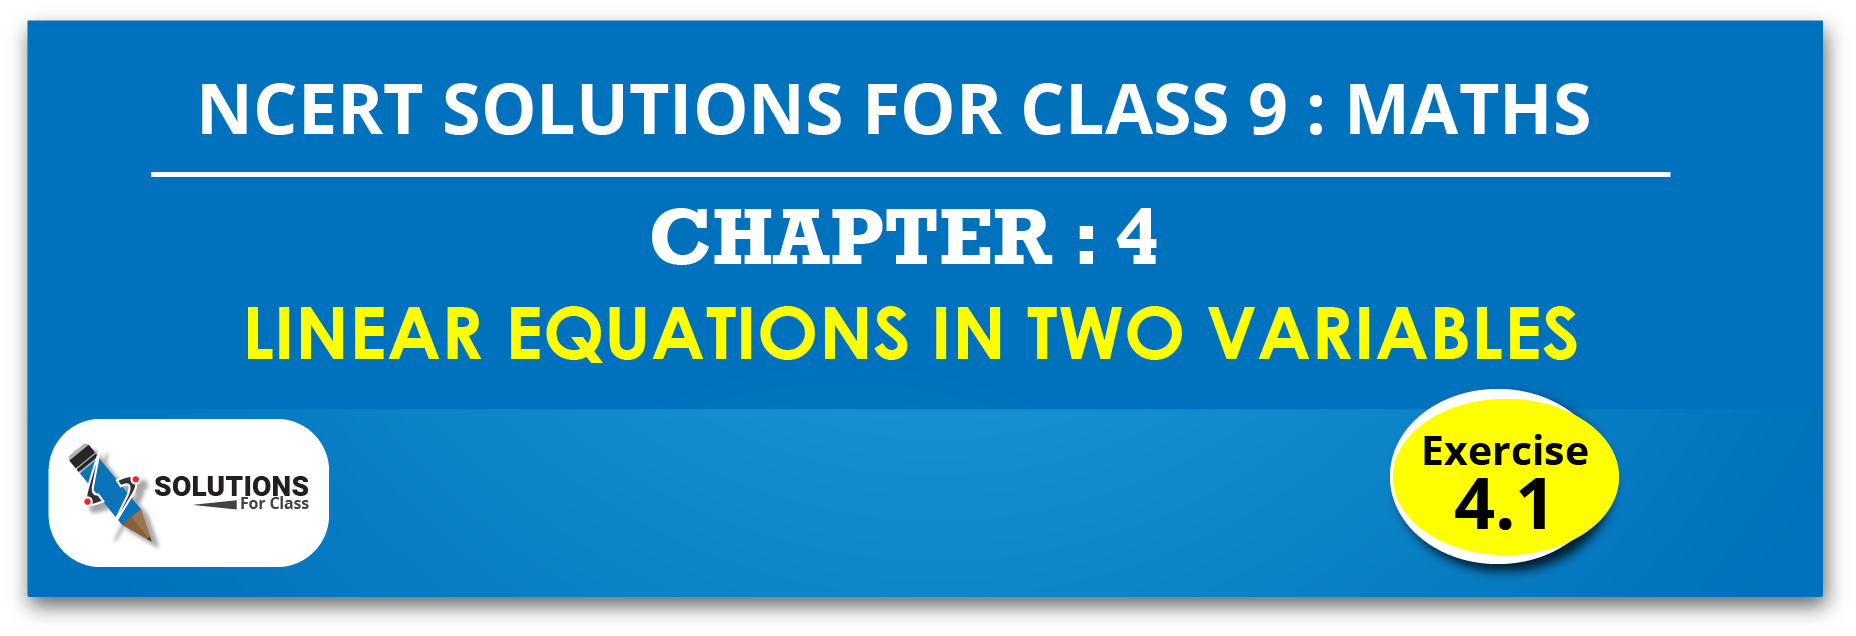 NCERT Solution For Class 9, Maths, Chapter 4, Linear Equations In Two Variables, Exercise 4.1